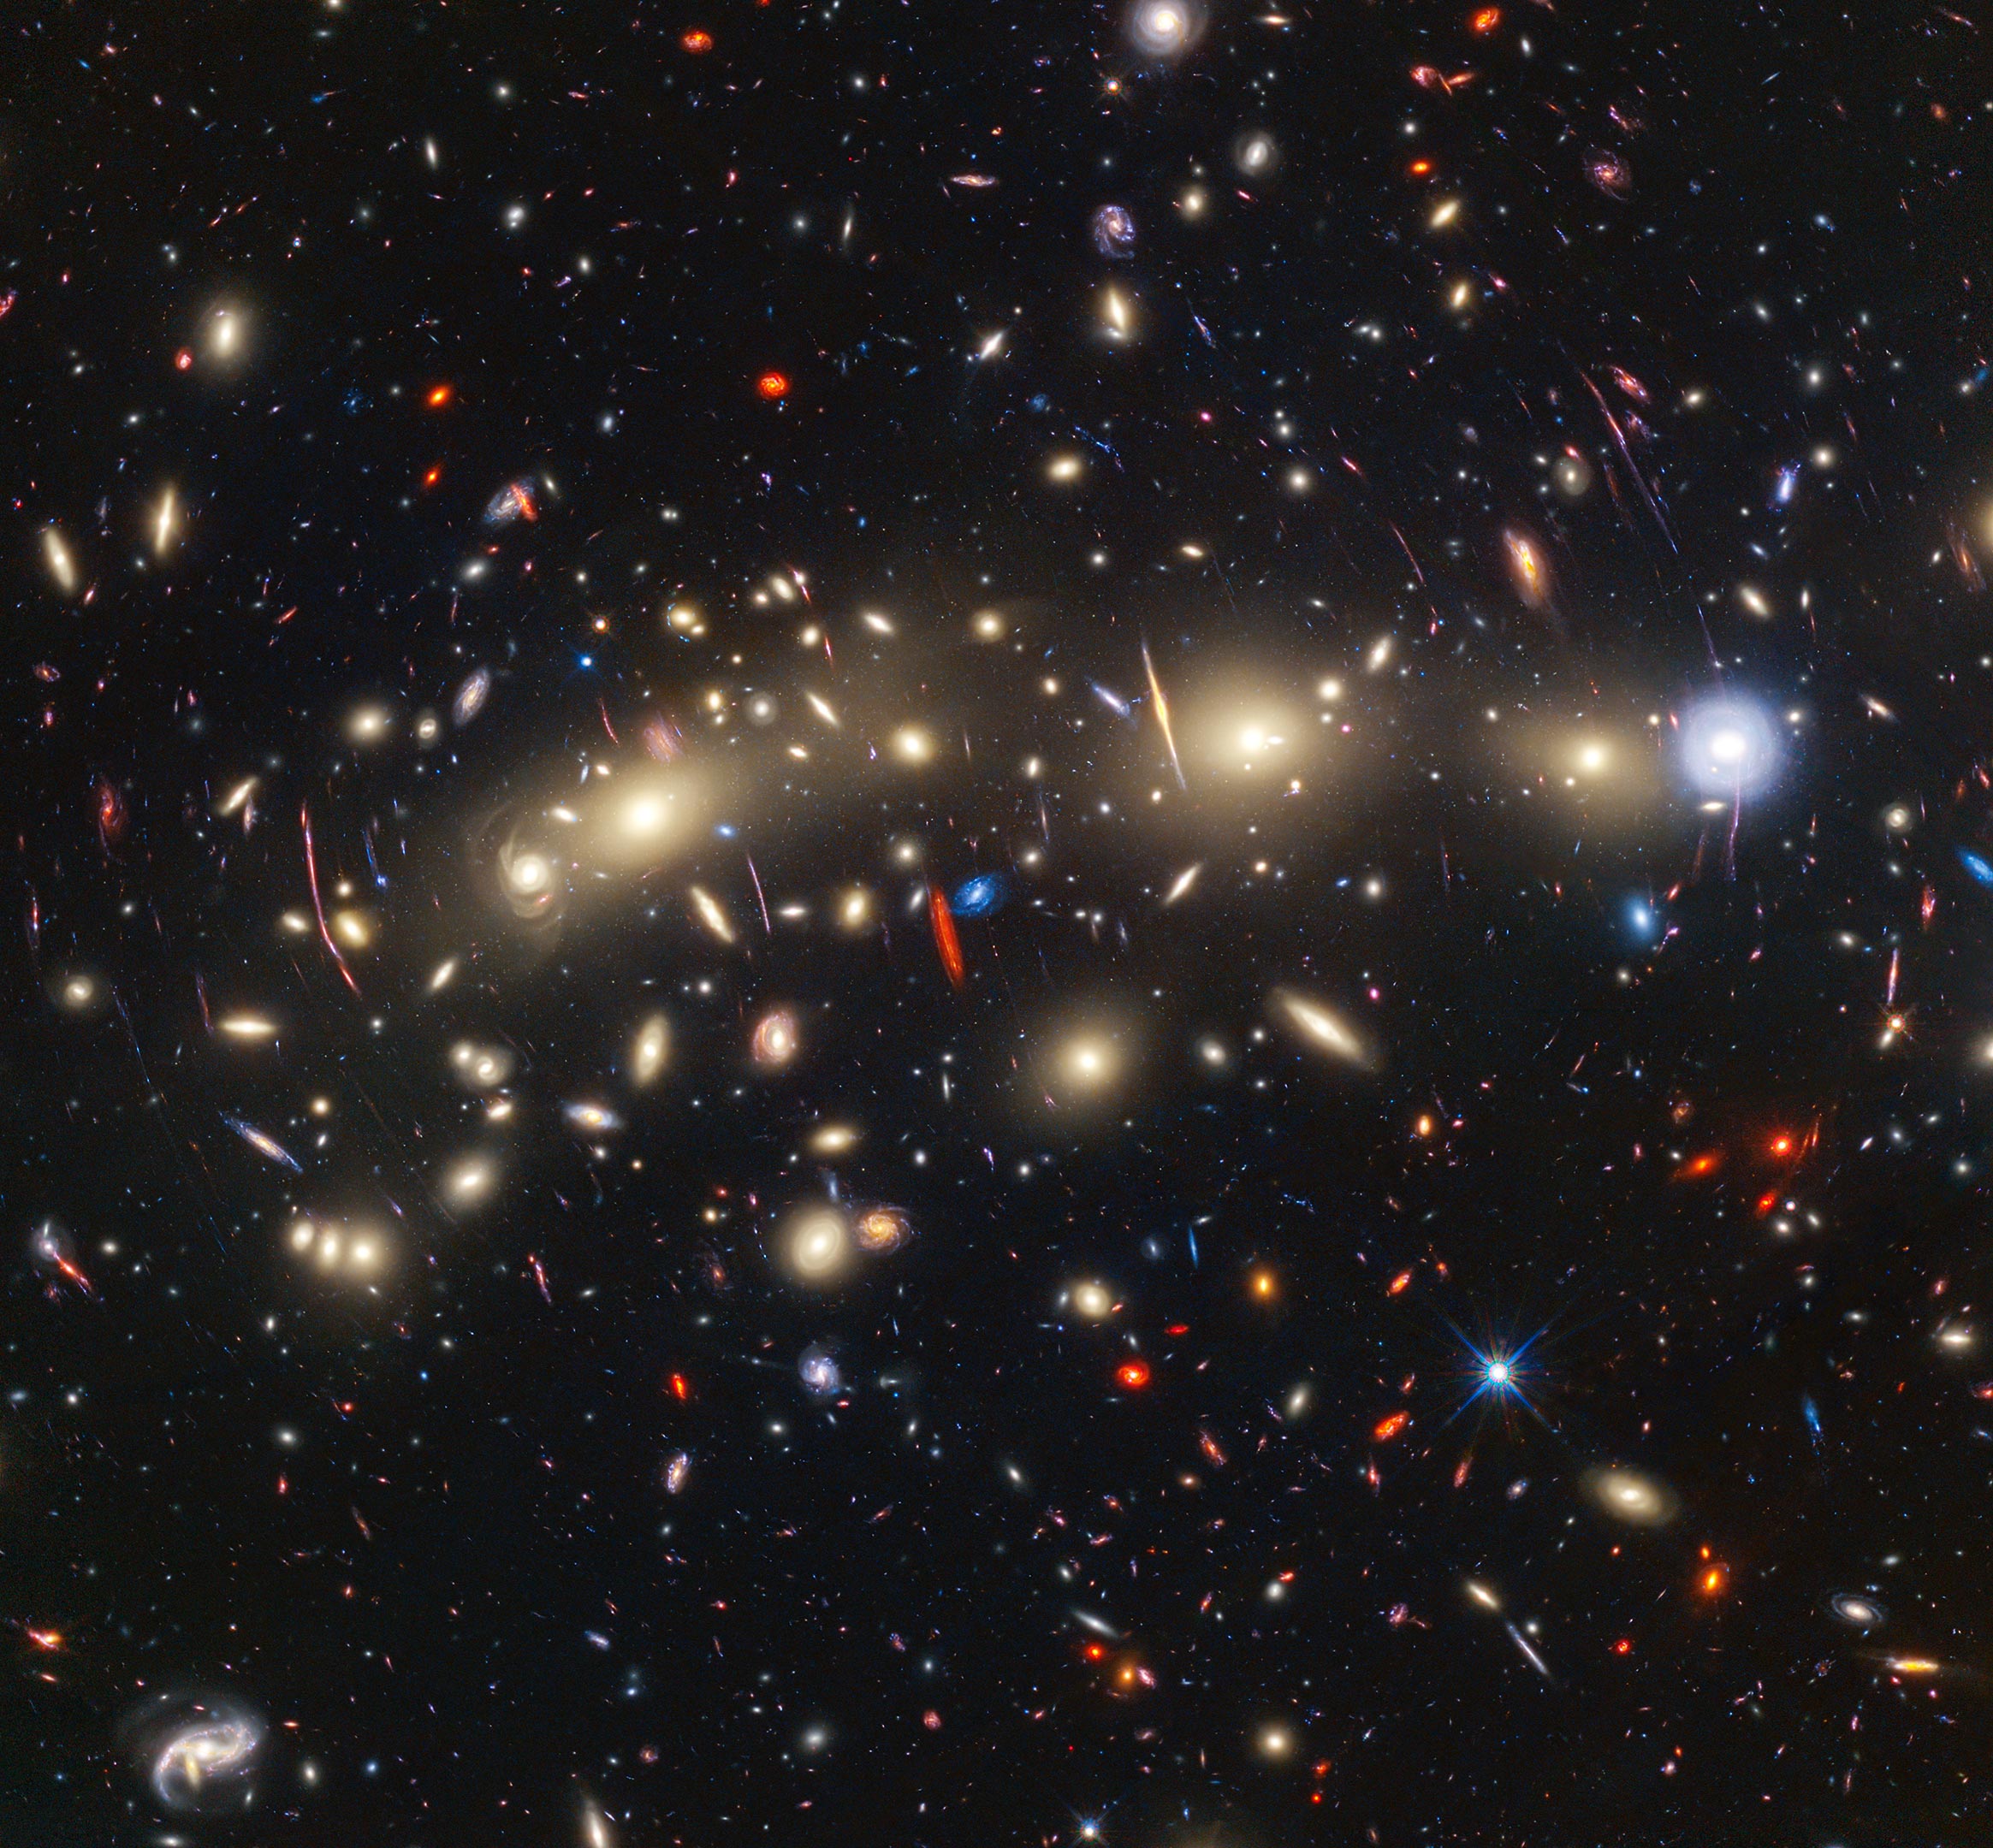 14 Transient Objects Discovered in Distant Galaxy Cluster